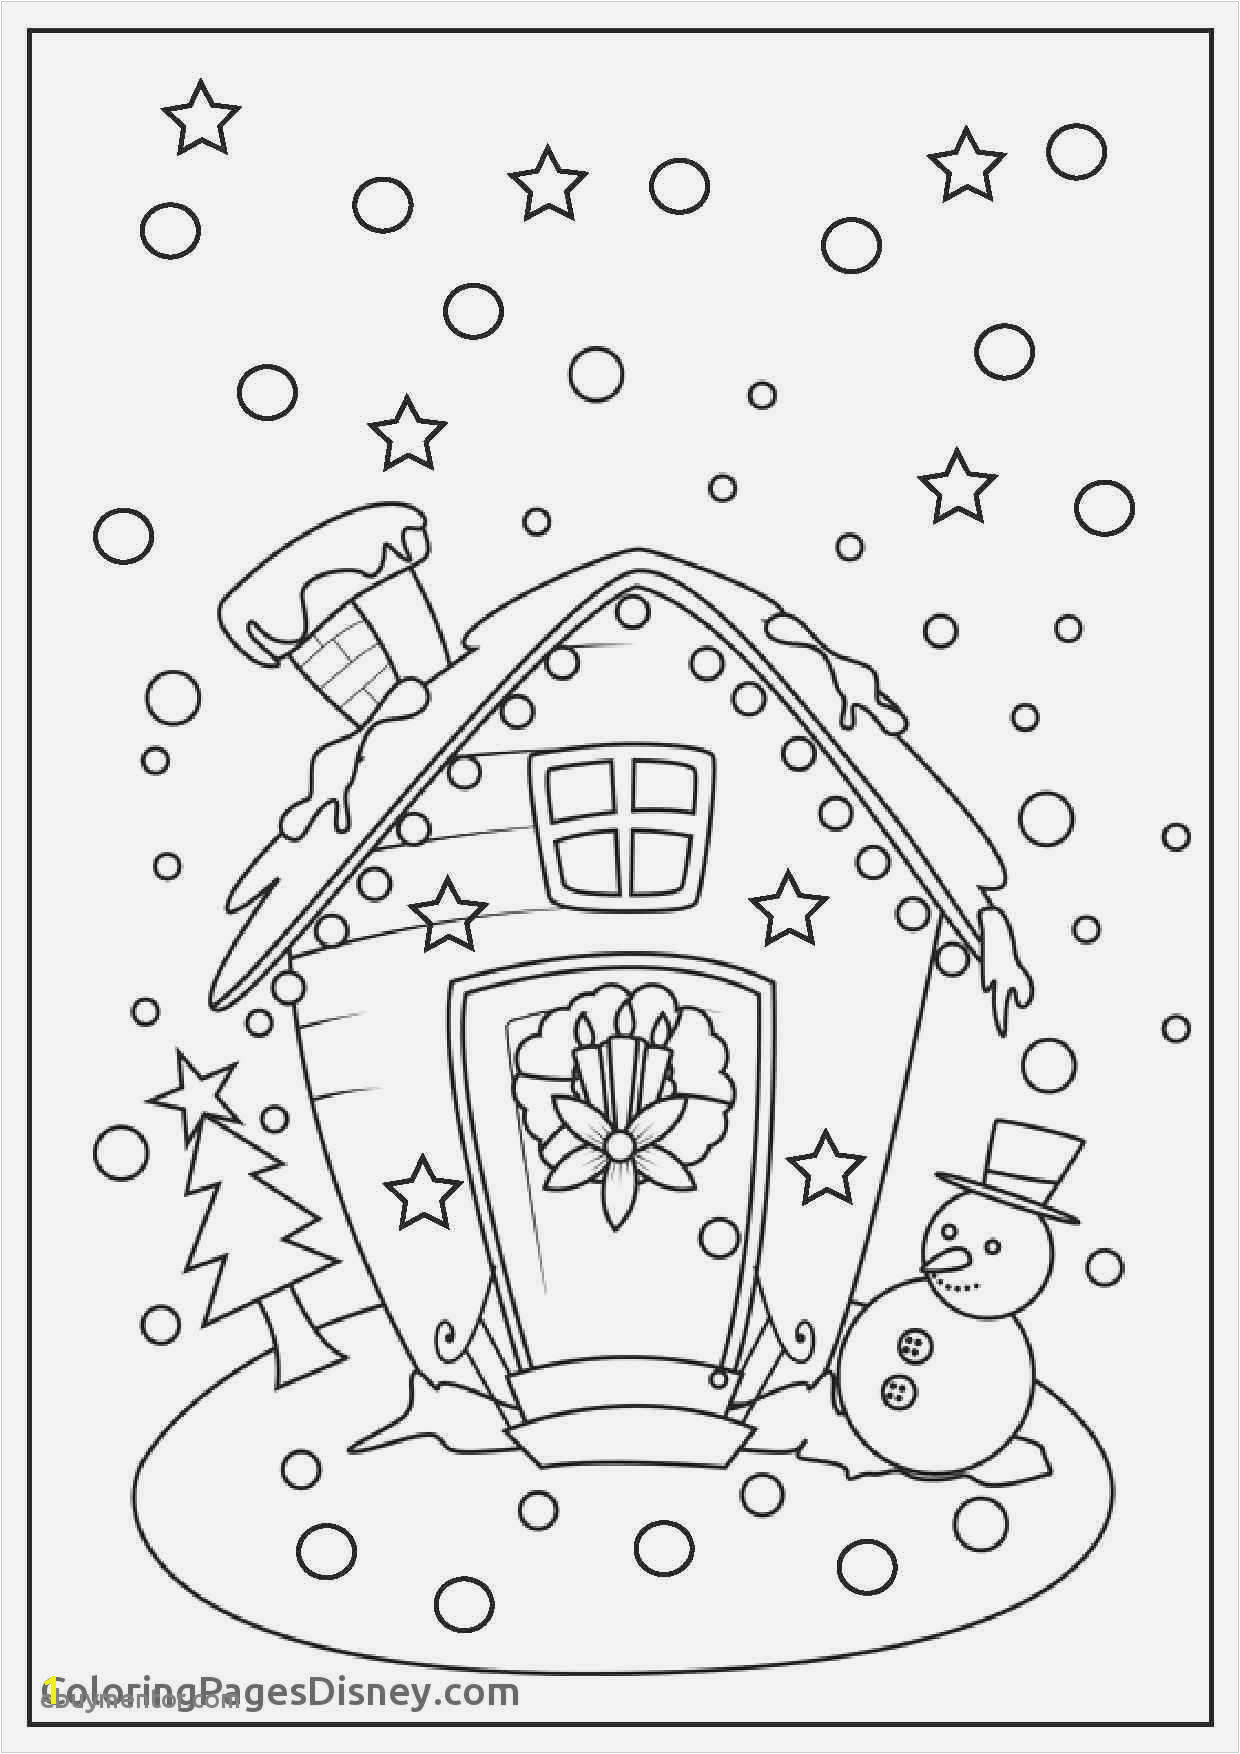 Free Coloring Pages for Teens Free Christmas Coloring Pages for Kids Cool Coloring Printables 0d